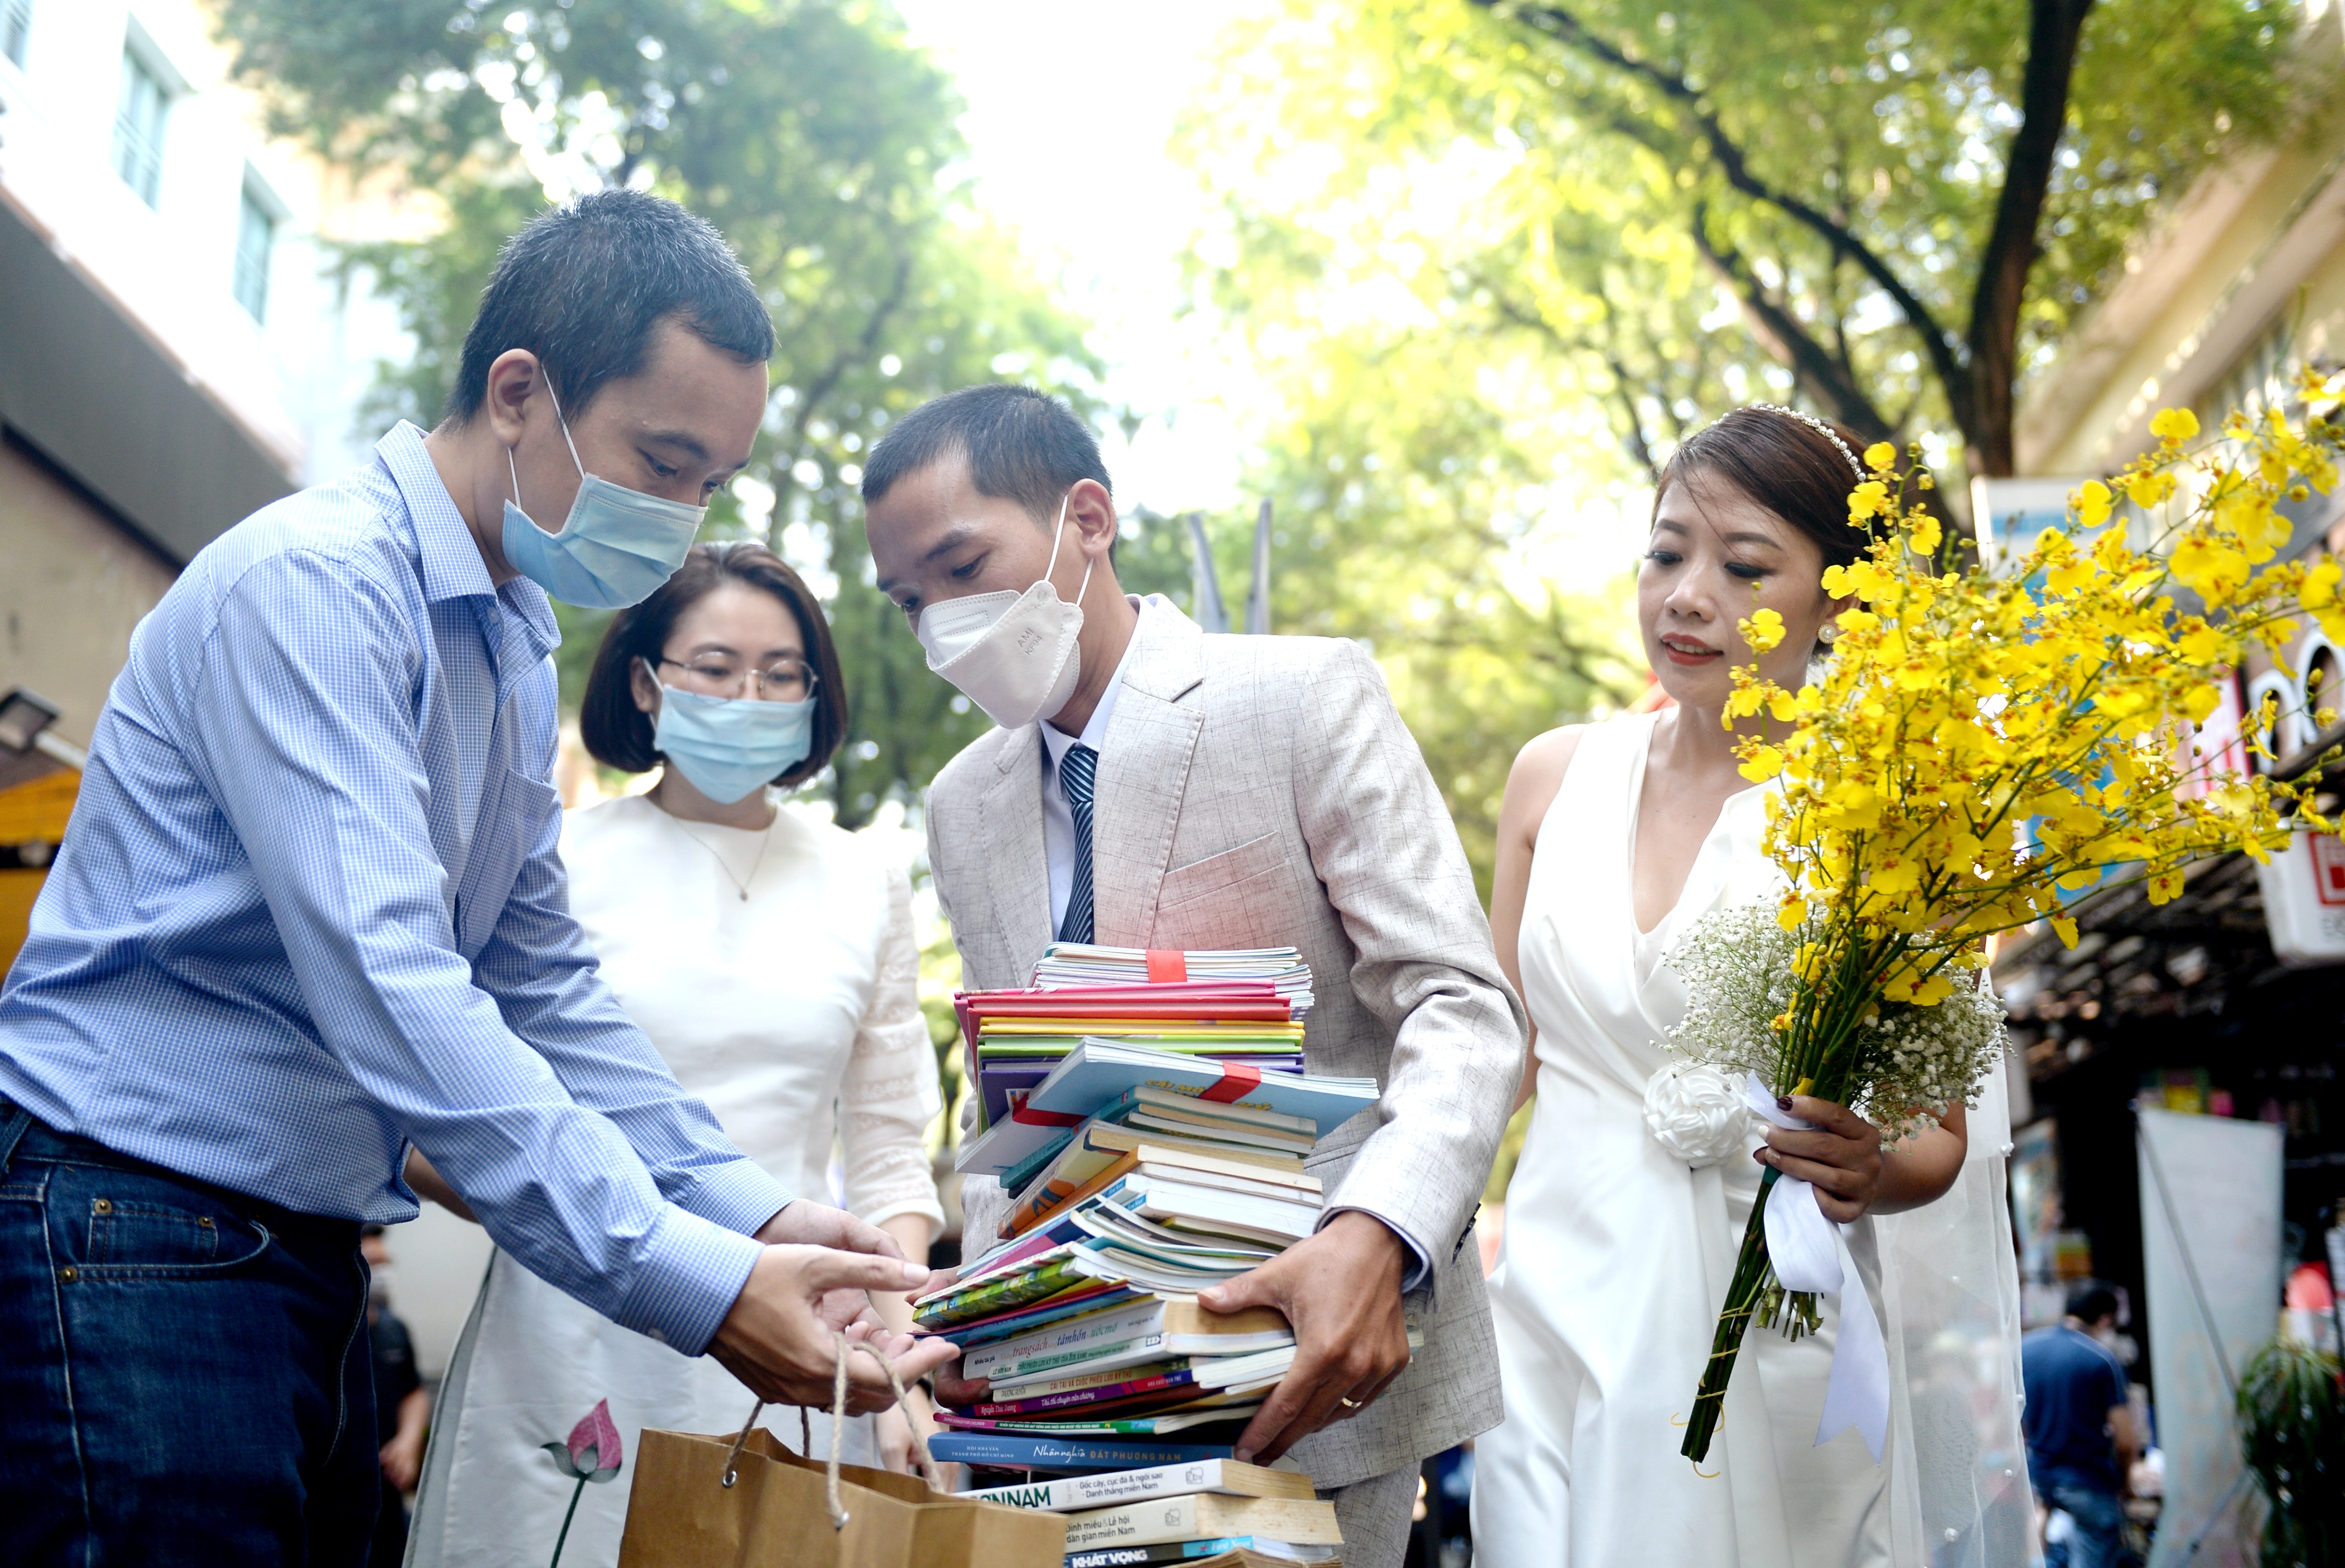 Tu Anh carries the books gifted by his friends at the wedding party in Ho Chi Minh City, November 21, 2021. Photo: Tu Trung / Tuoi Tre